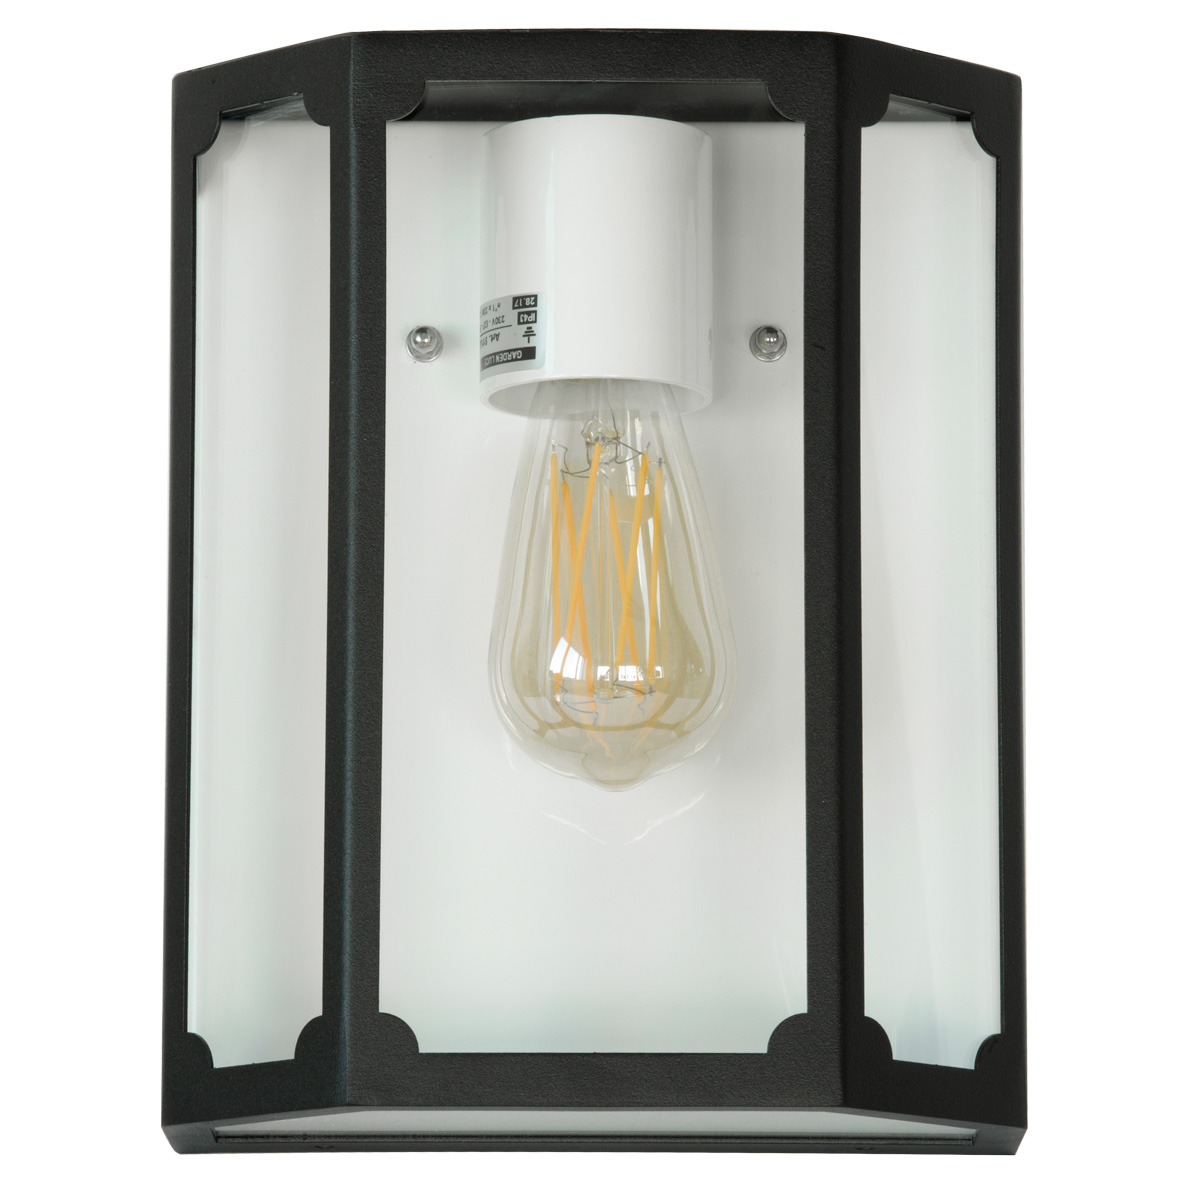 Flat Five-Paneled Wall Light for Outdoor Use